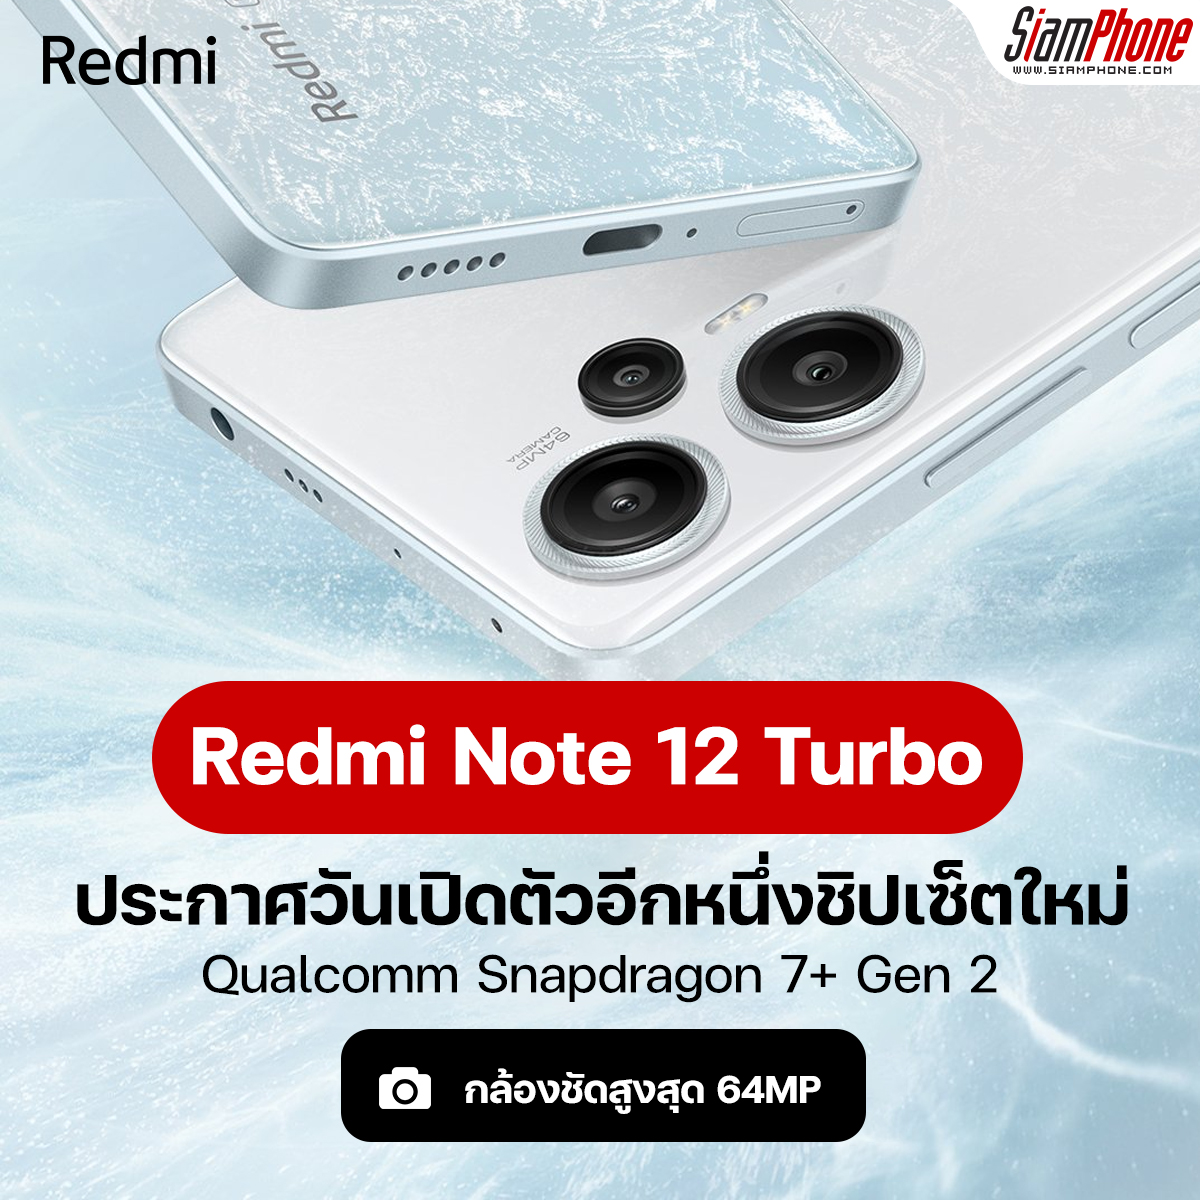 Redmi Note 12 Turbo announces launch date  Another Snapdragon 7+ Gen 2 chipset